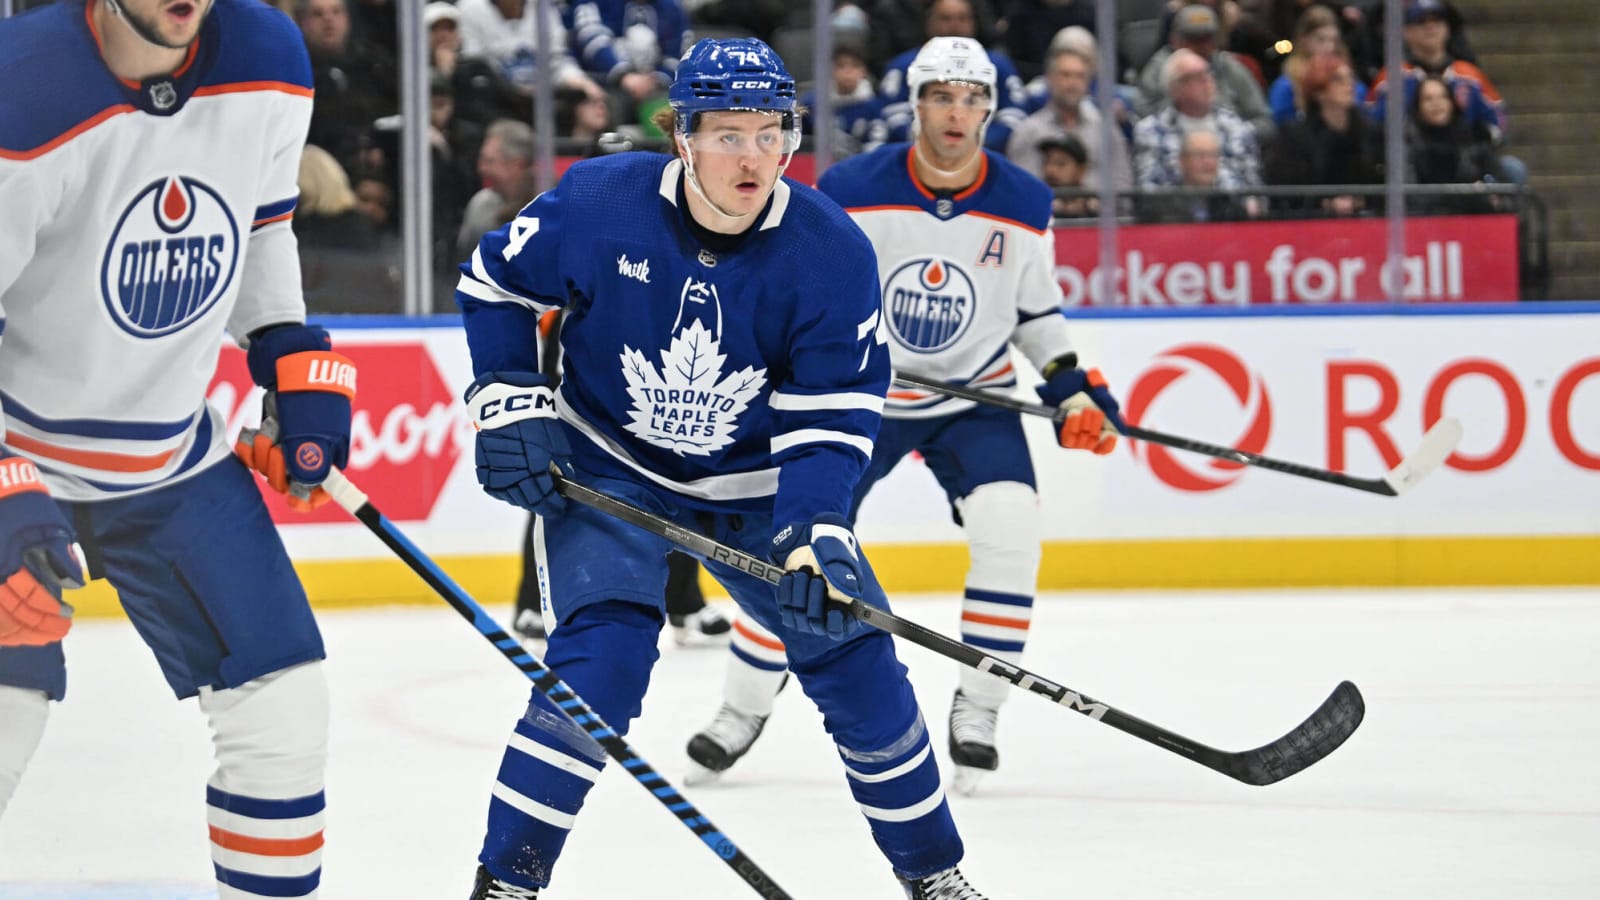 3 Takeaways from Maple Leafs 6-3 Win Over the Oilers